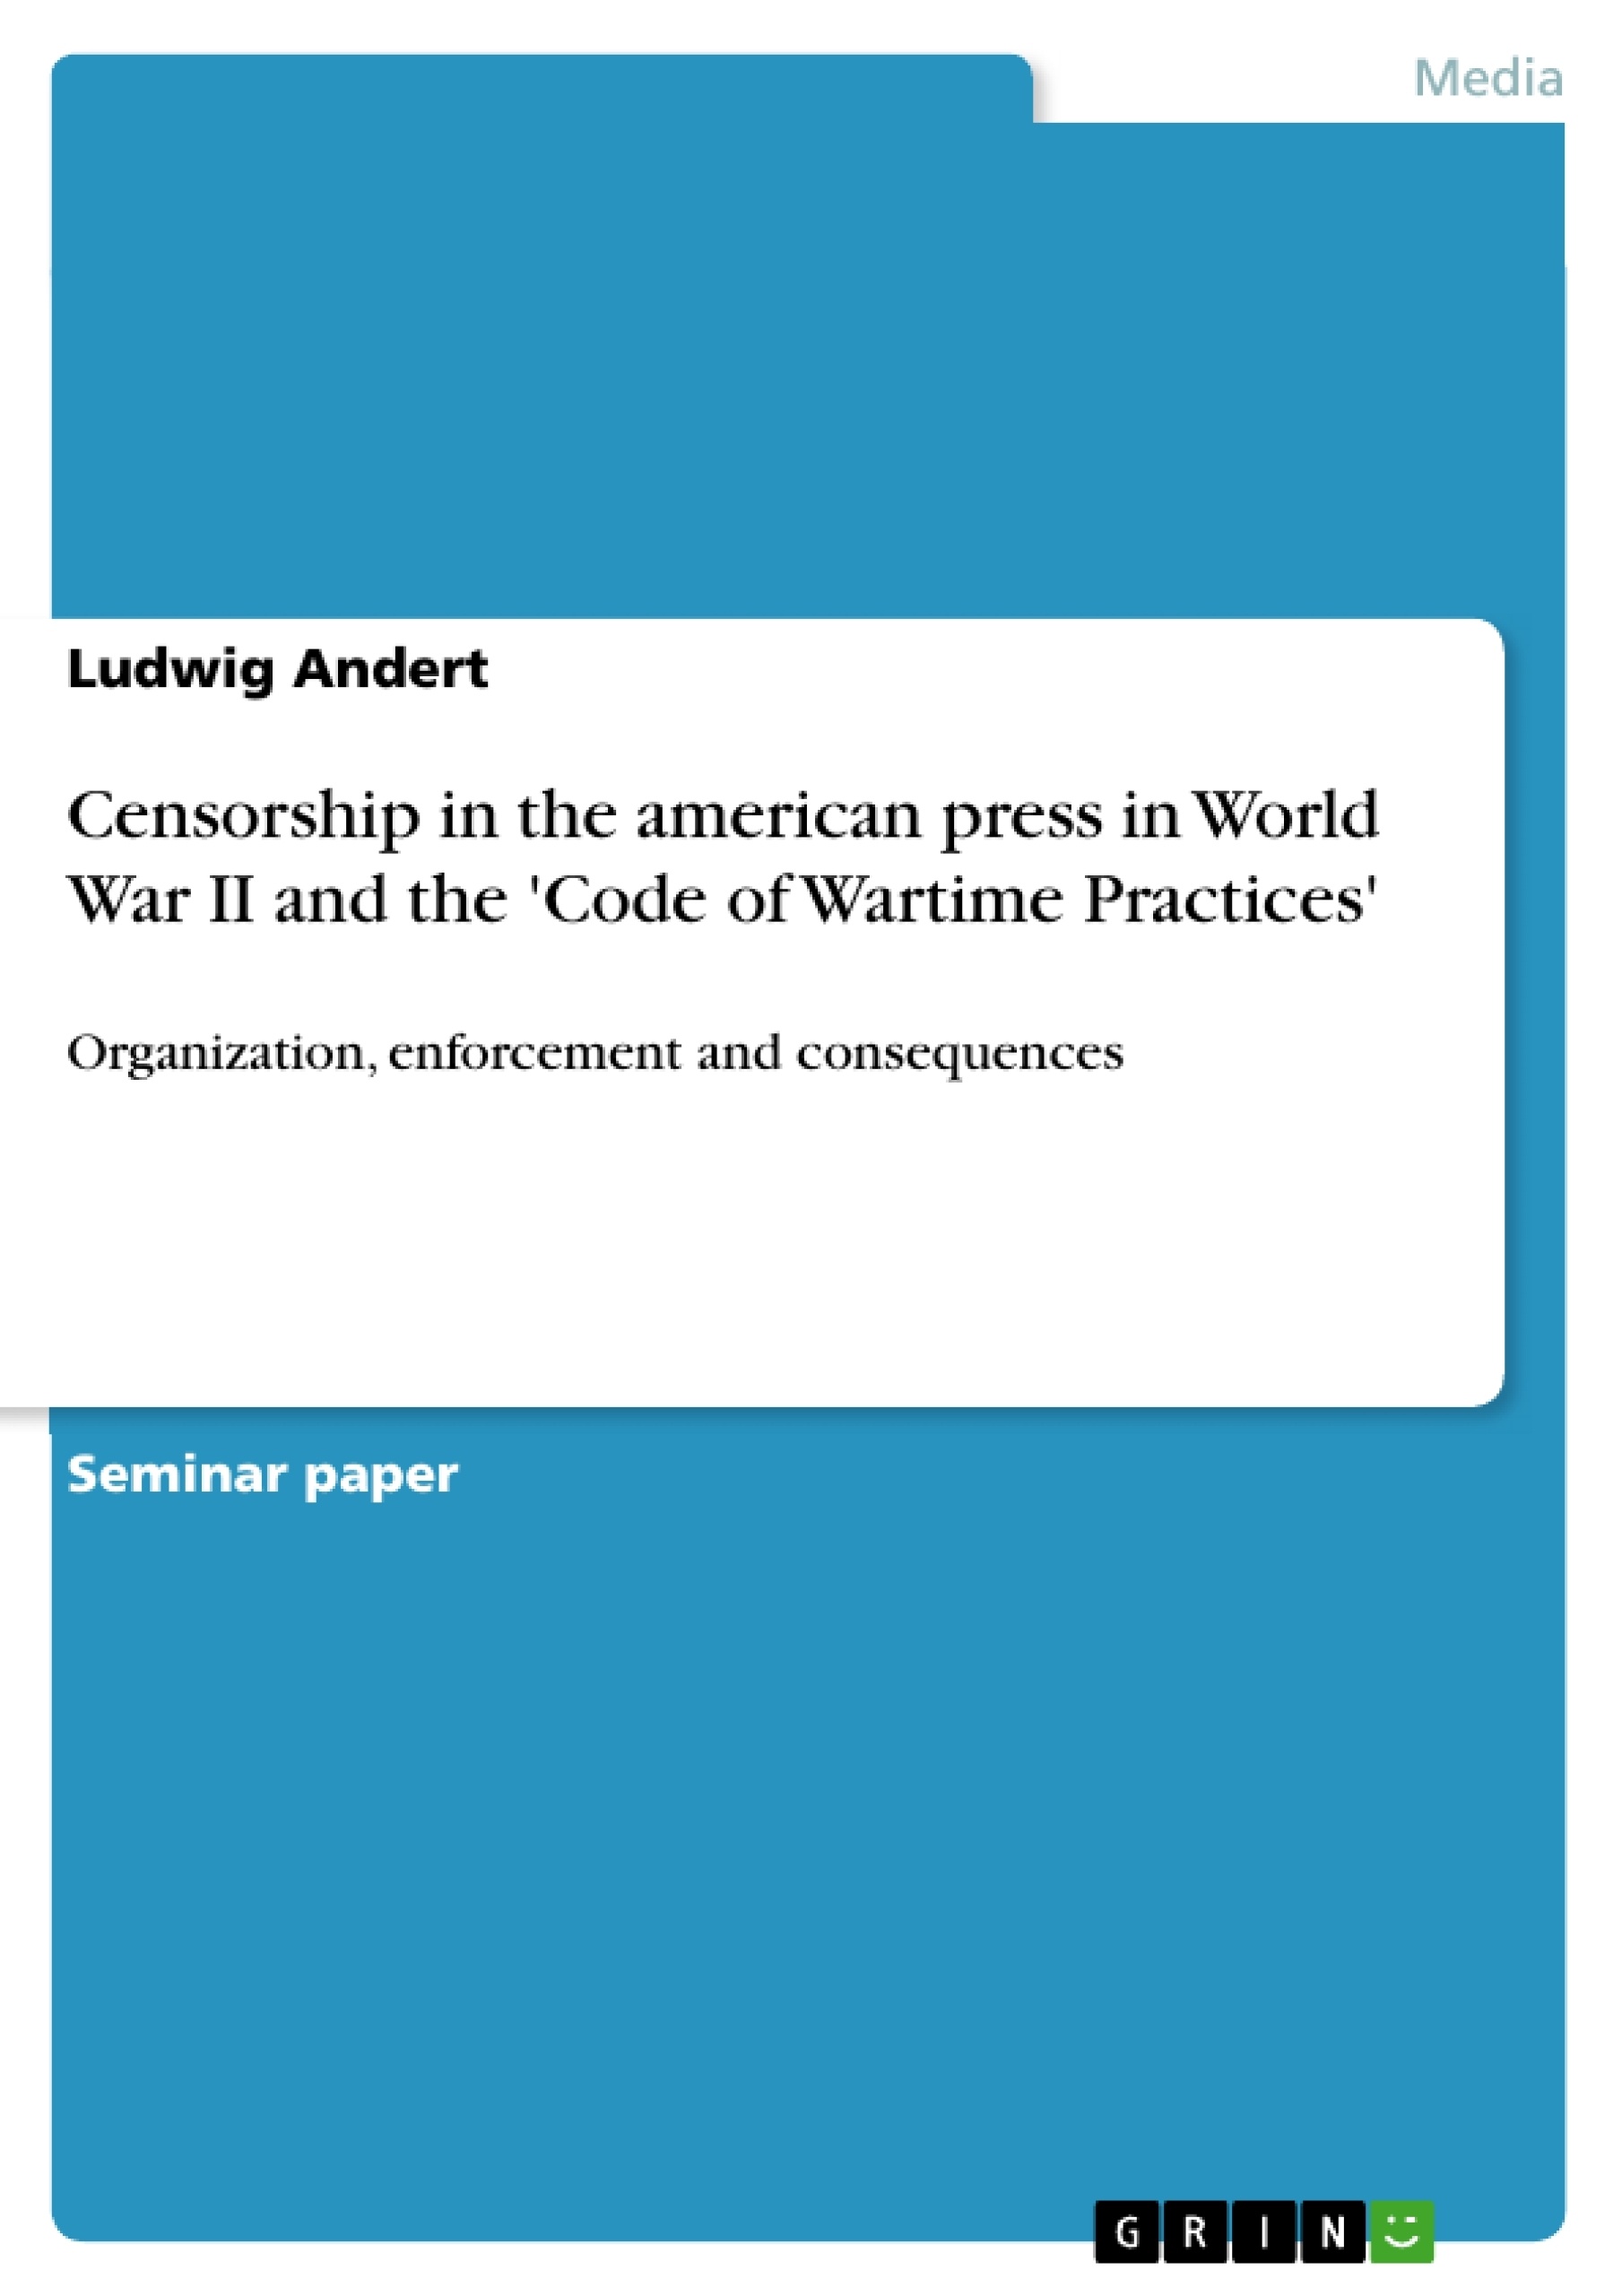 Título: Censorship in the american press in World War II and the 'Code of Wartime Practices'